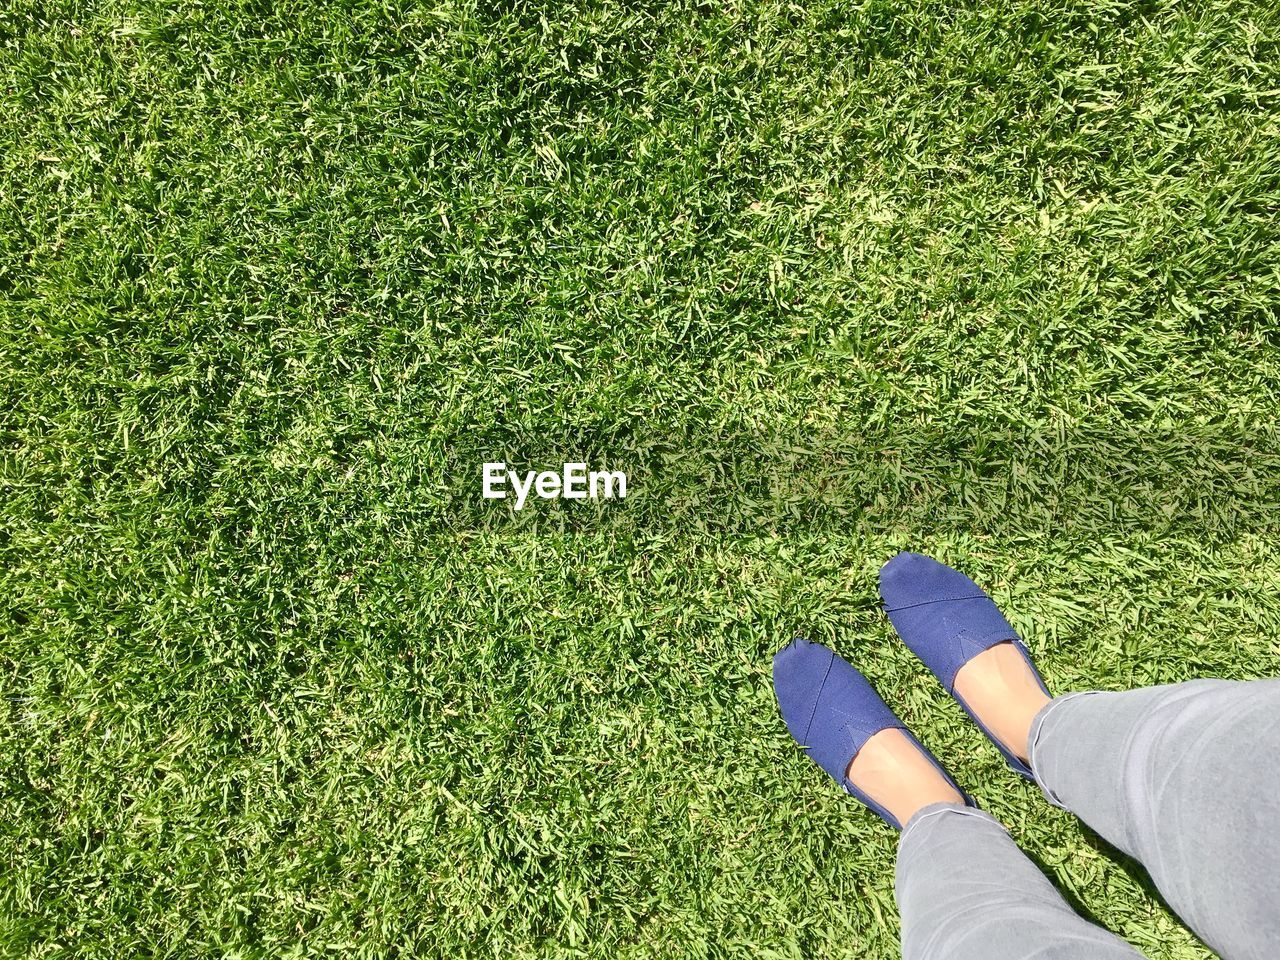 HIGH ANGLE VIEW OF WOMAN ON FIELD